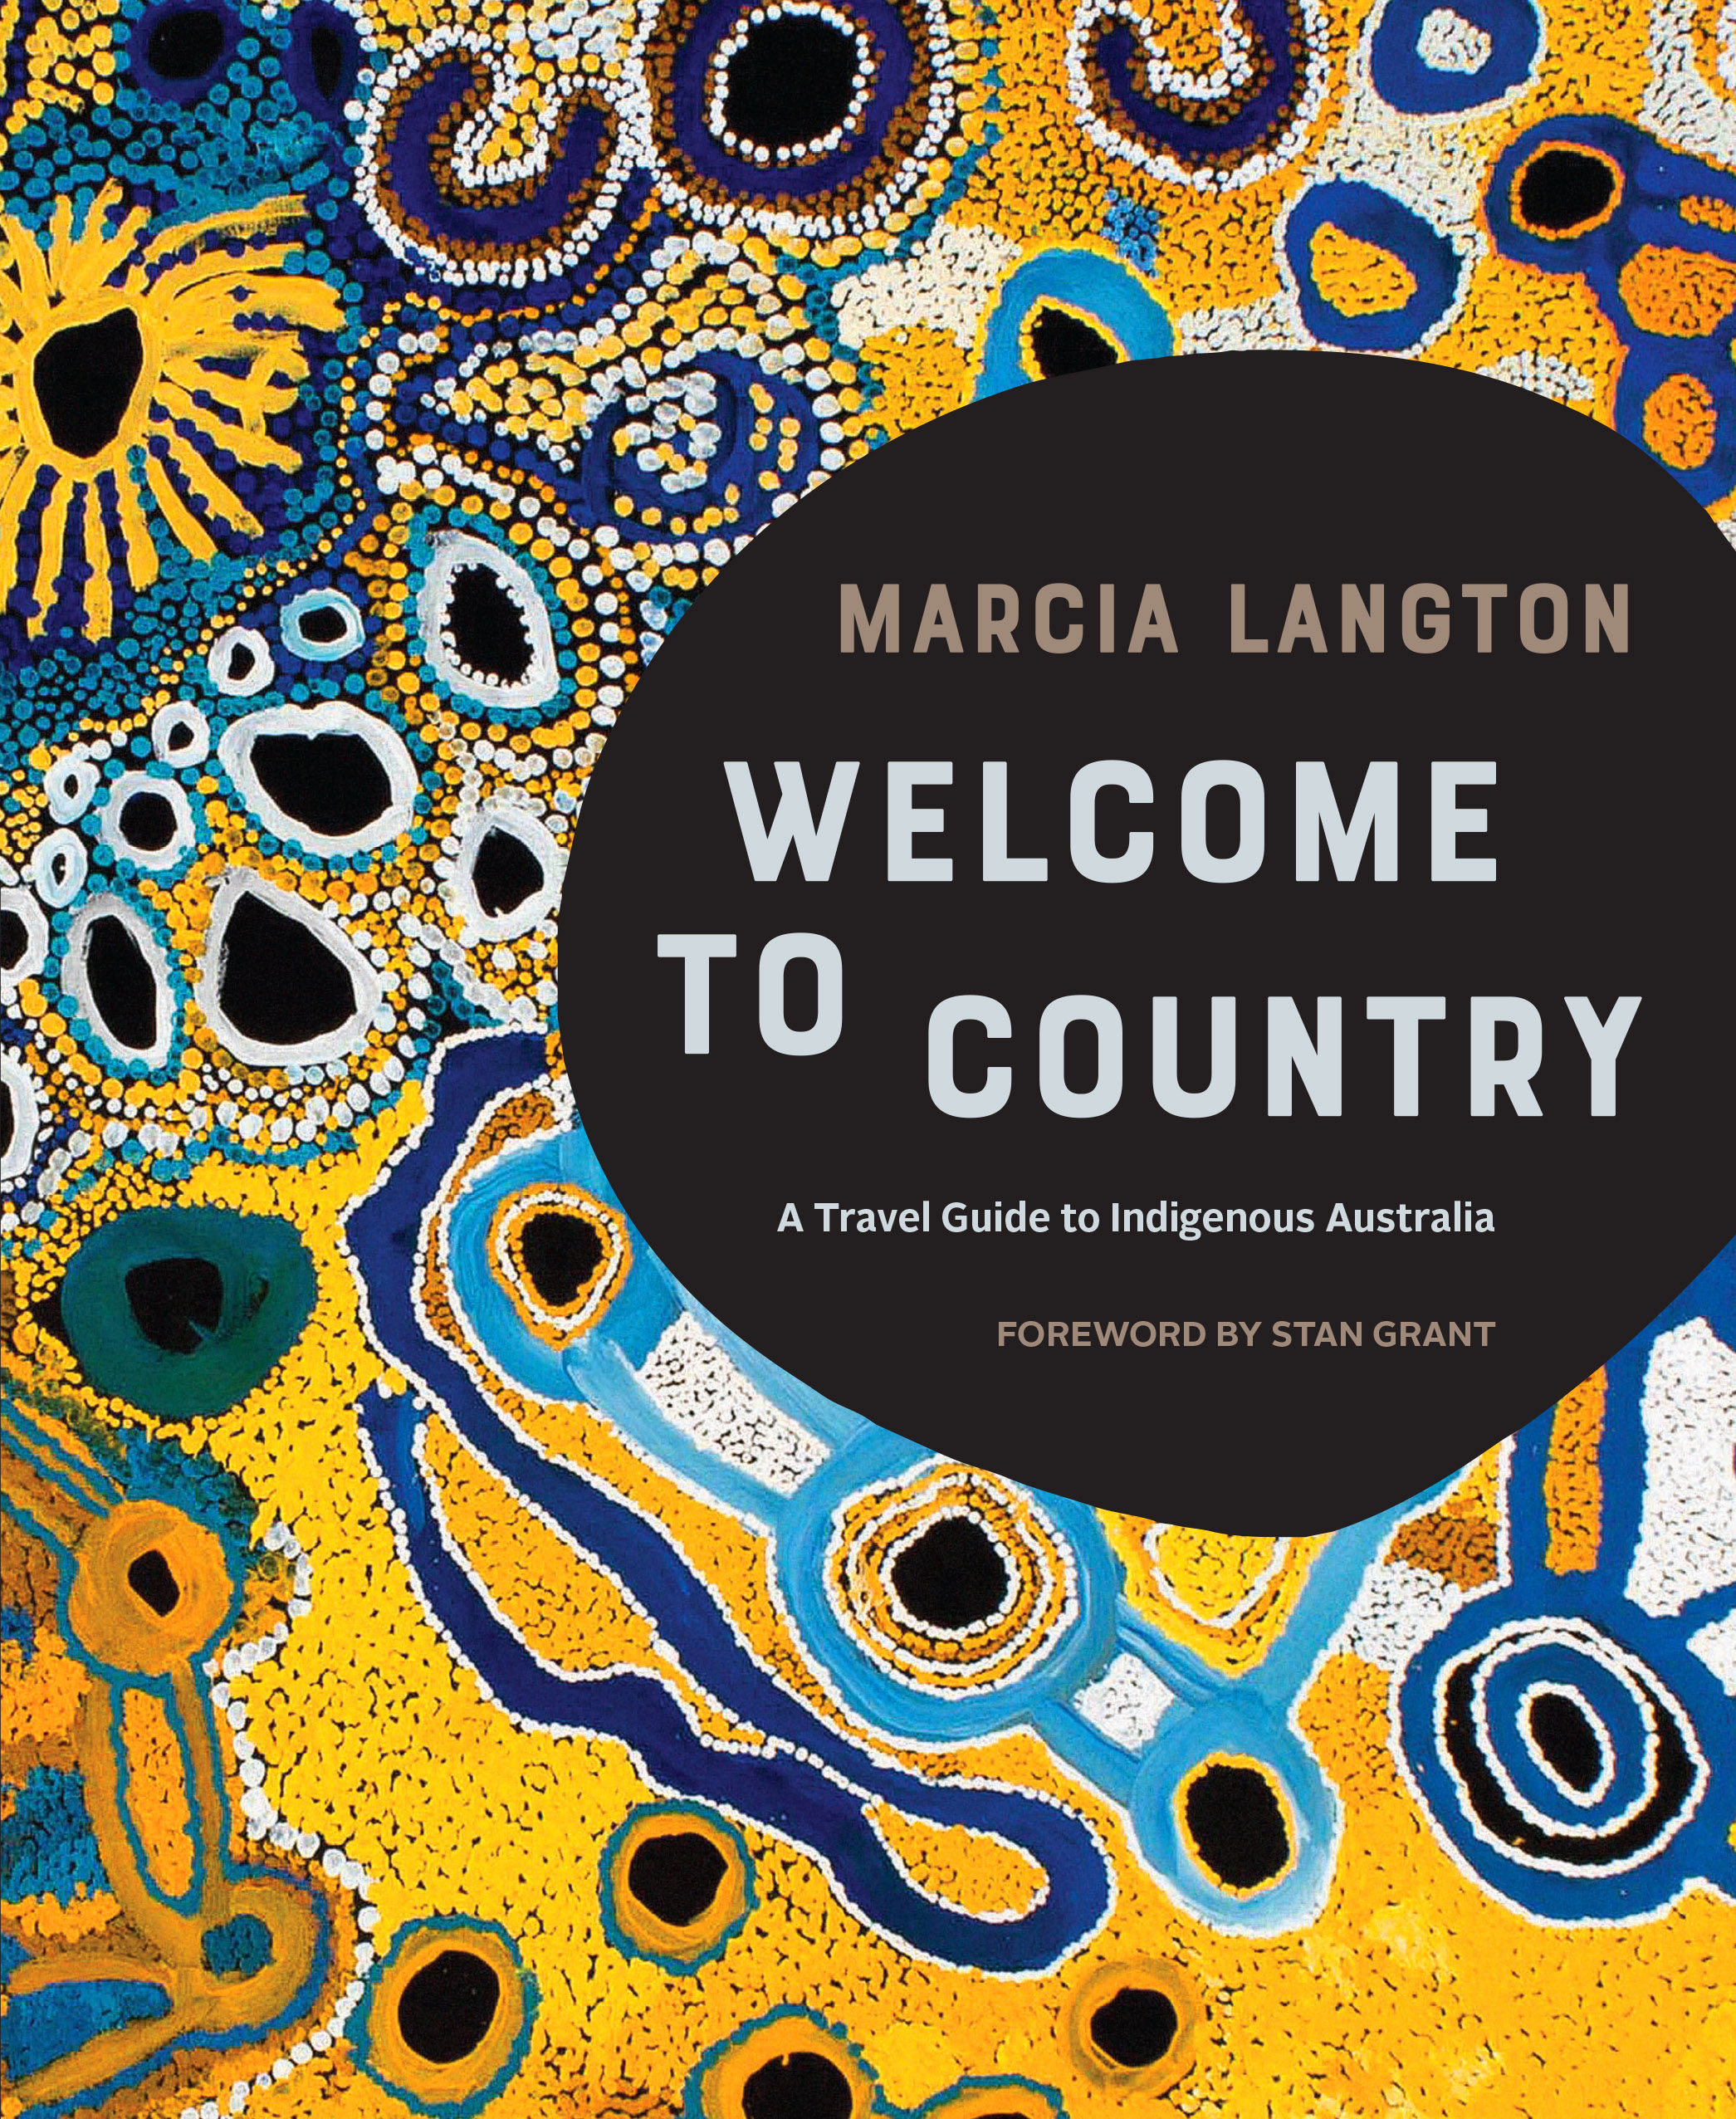 The cover of Marcia Langton's Welcome to Country book